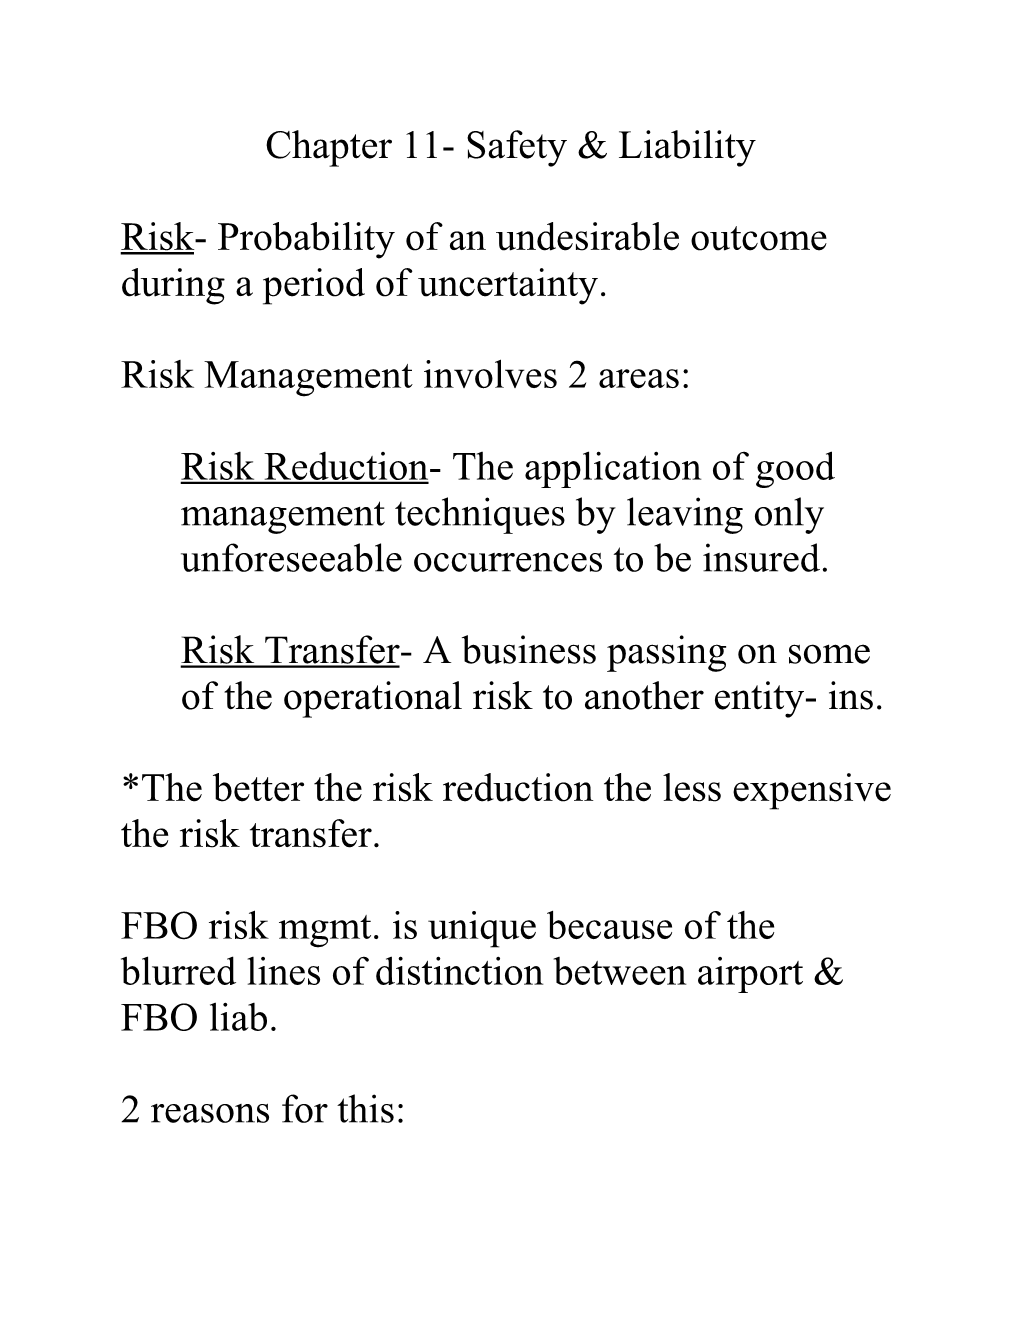 Risk- Probability of an Undesirable Outcome During a Period of Uncertainty